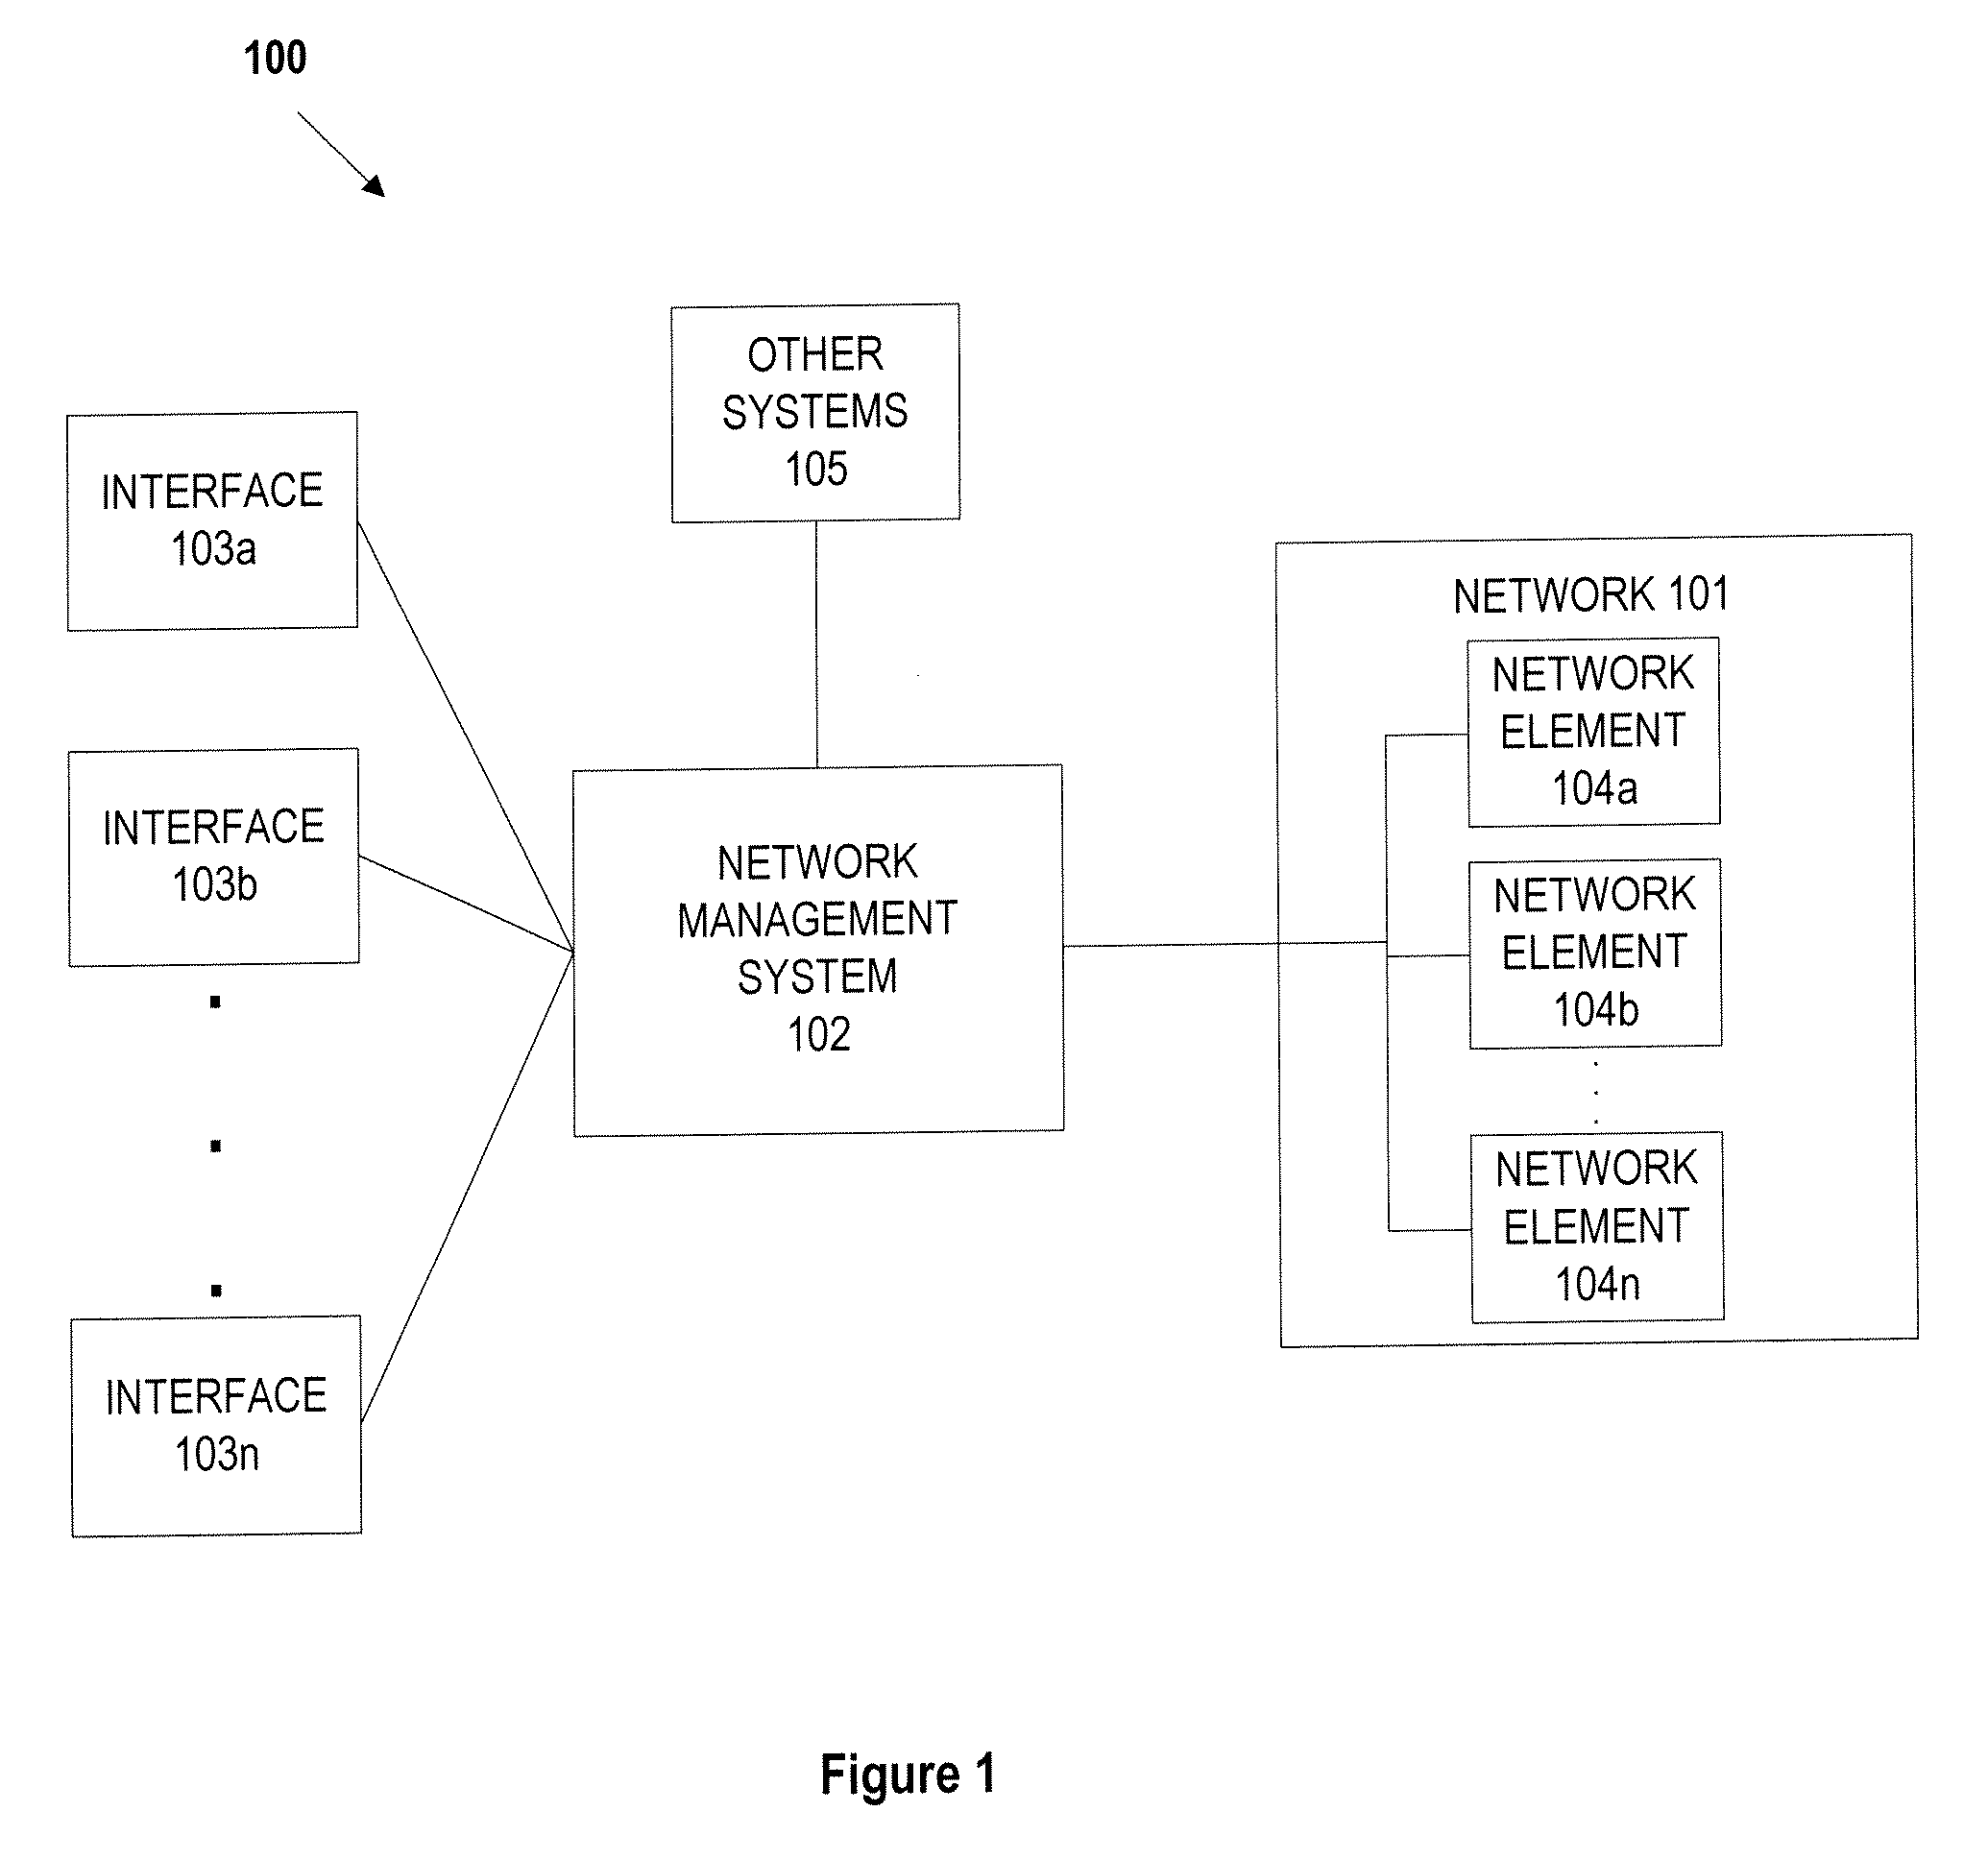 Network element connection management within a network management system